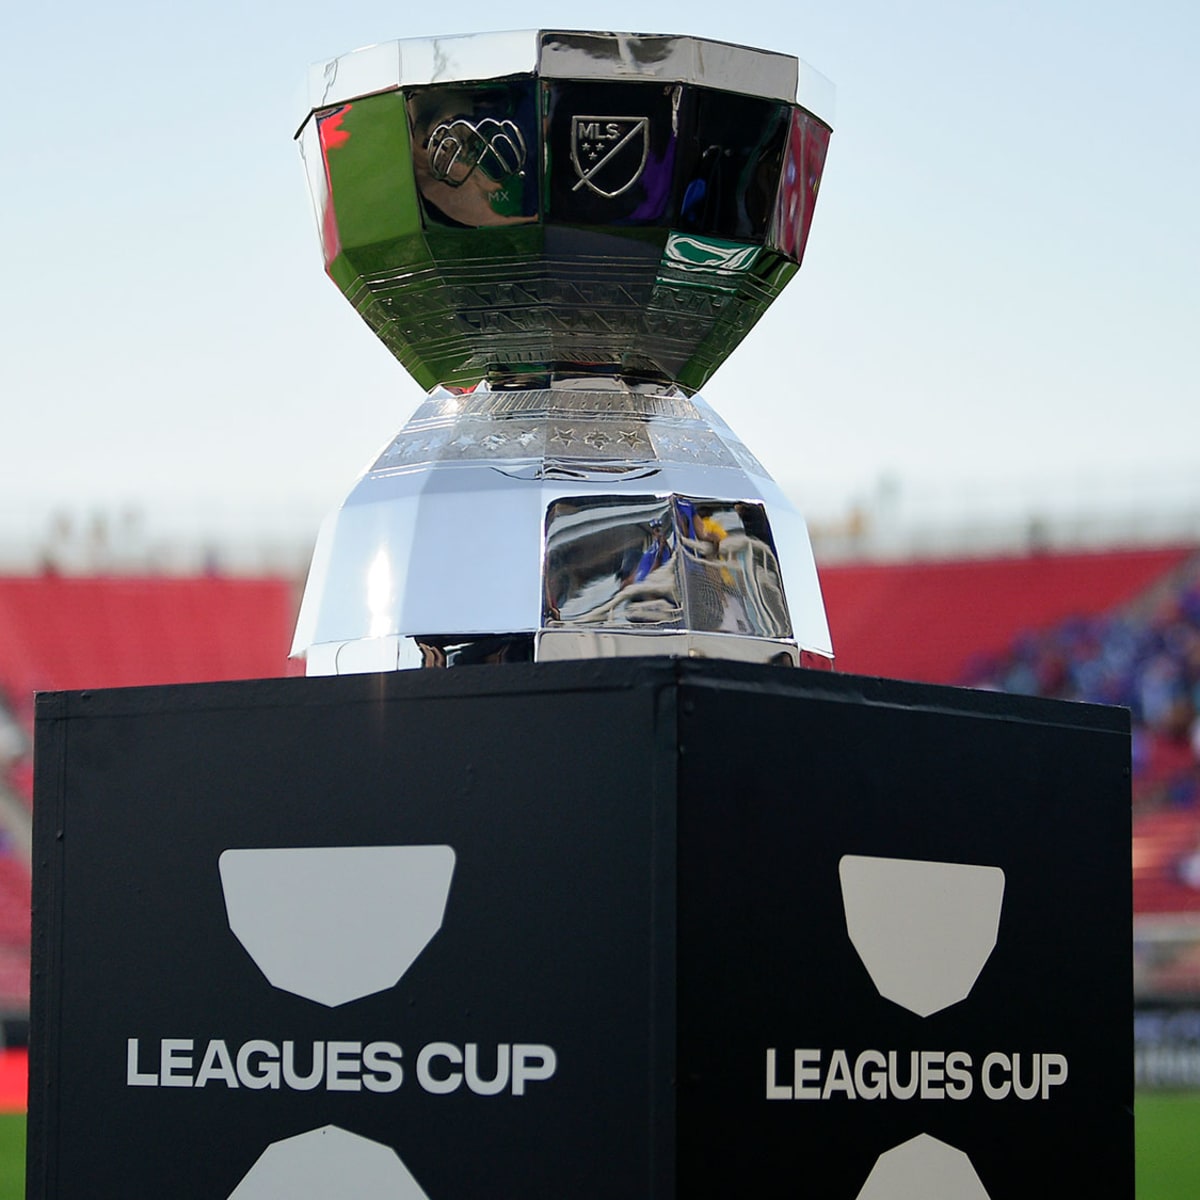 Leagues Cup Unveils 2023 Match Schedule and Bracket Announcement